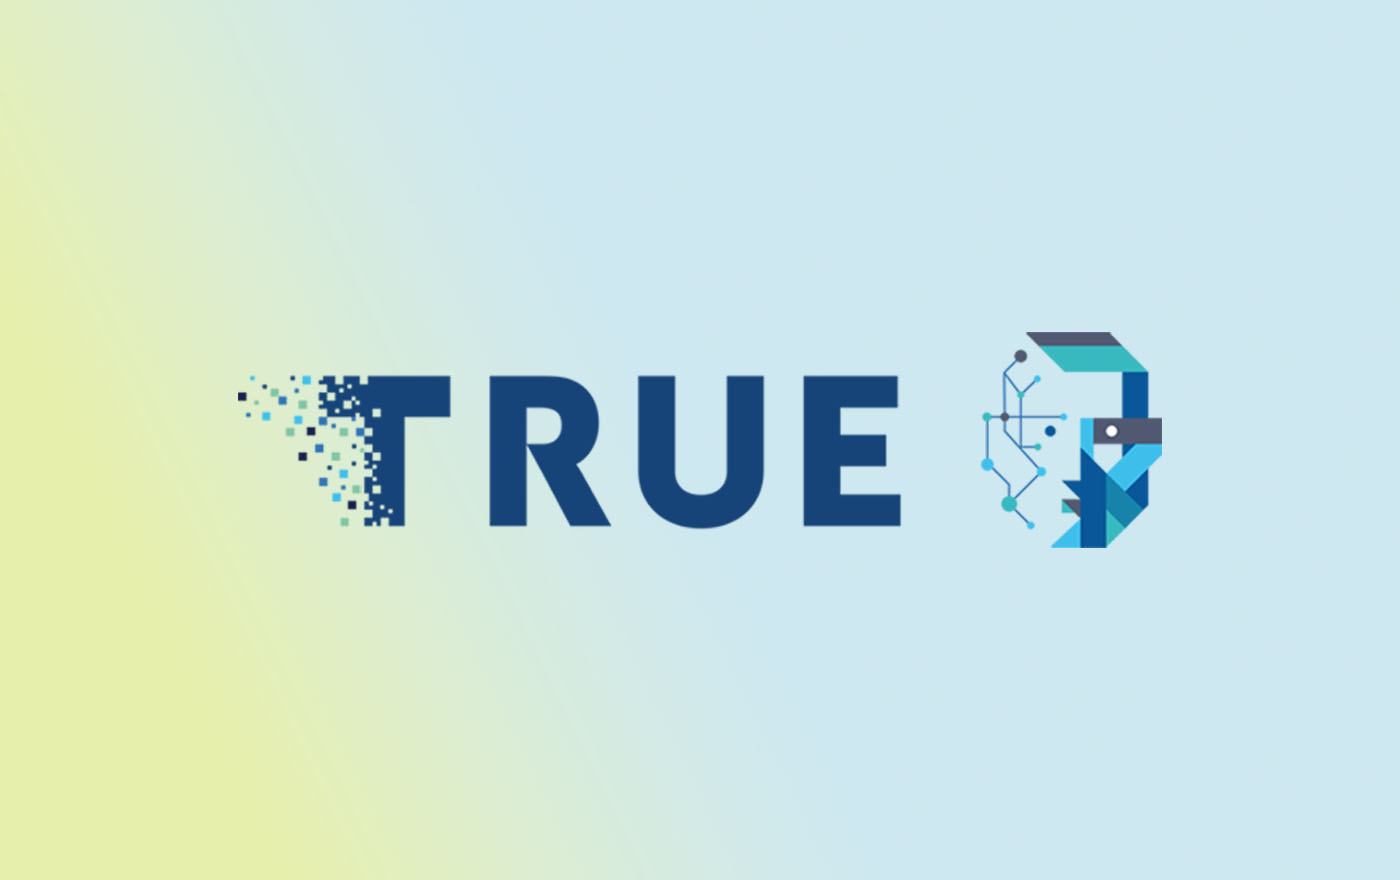 TRUE Project Holds Landmark Mock Trial to Test Jurors’ Trust in User-Generated Evidence